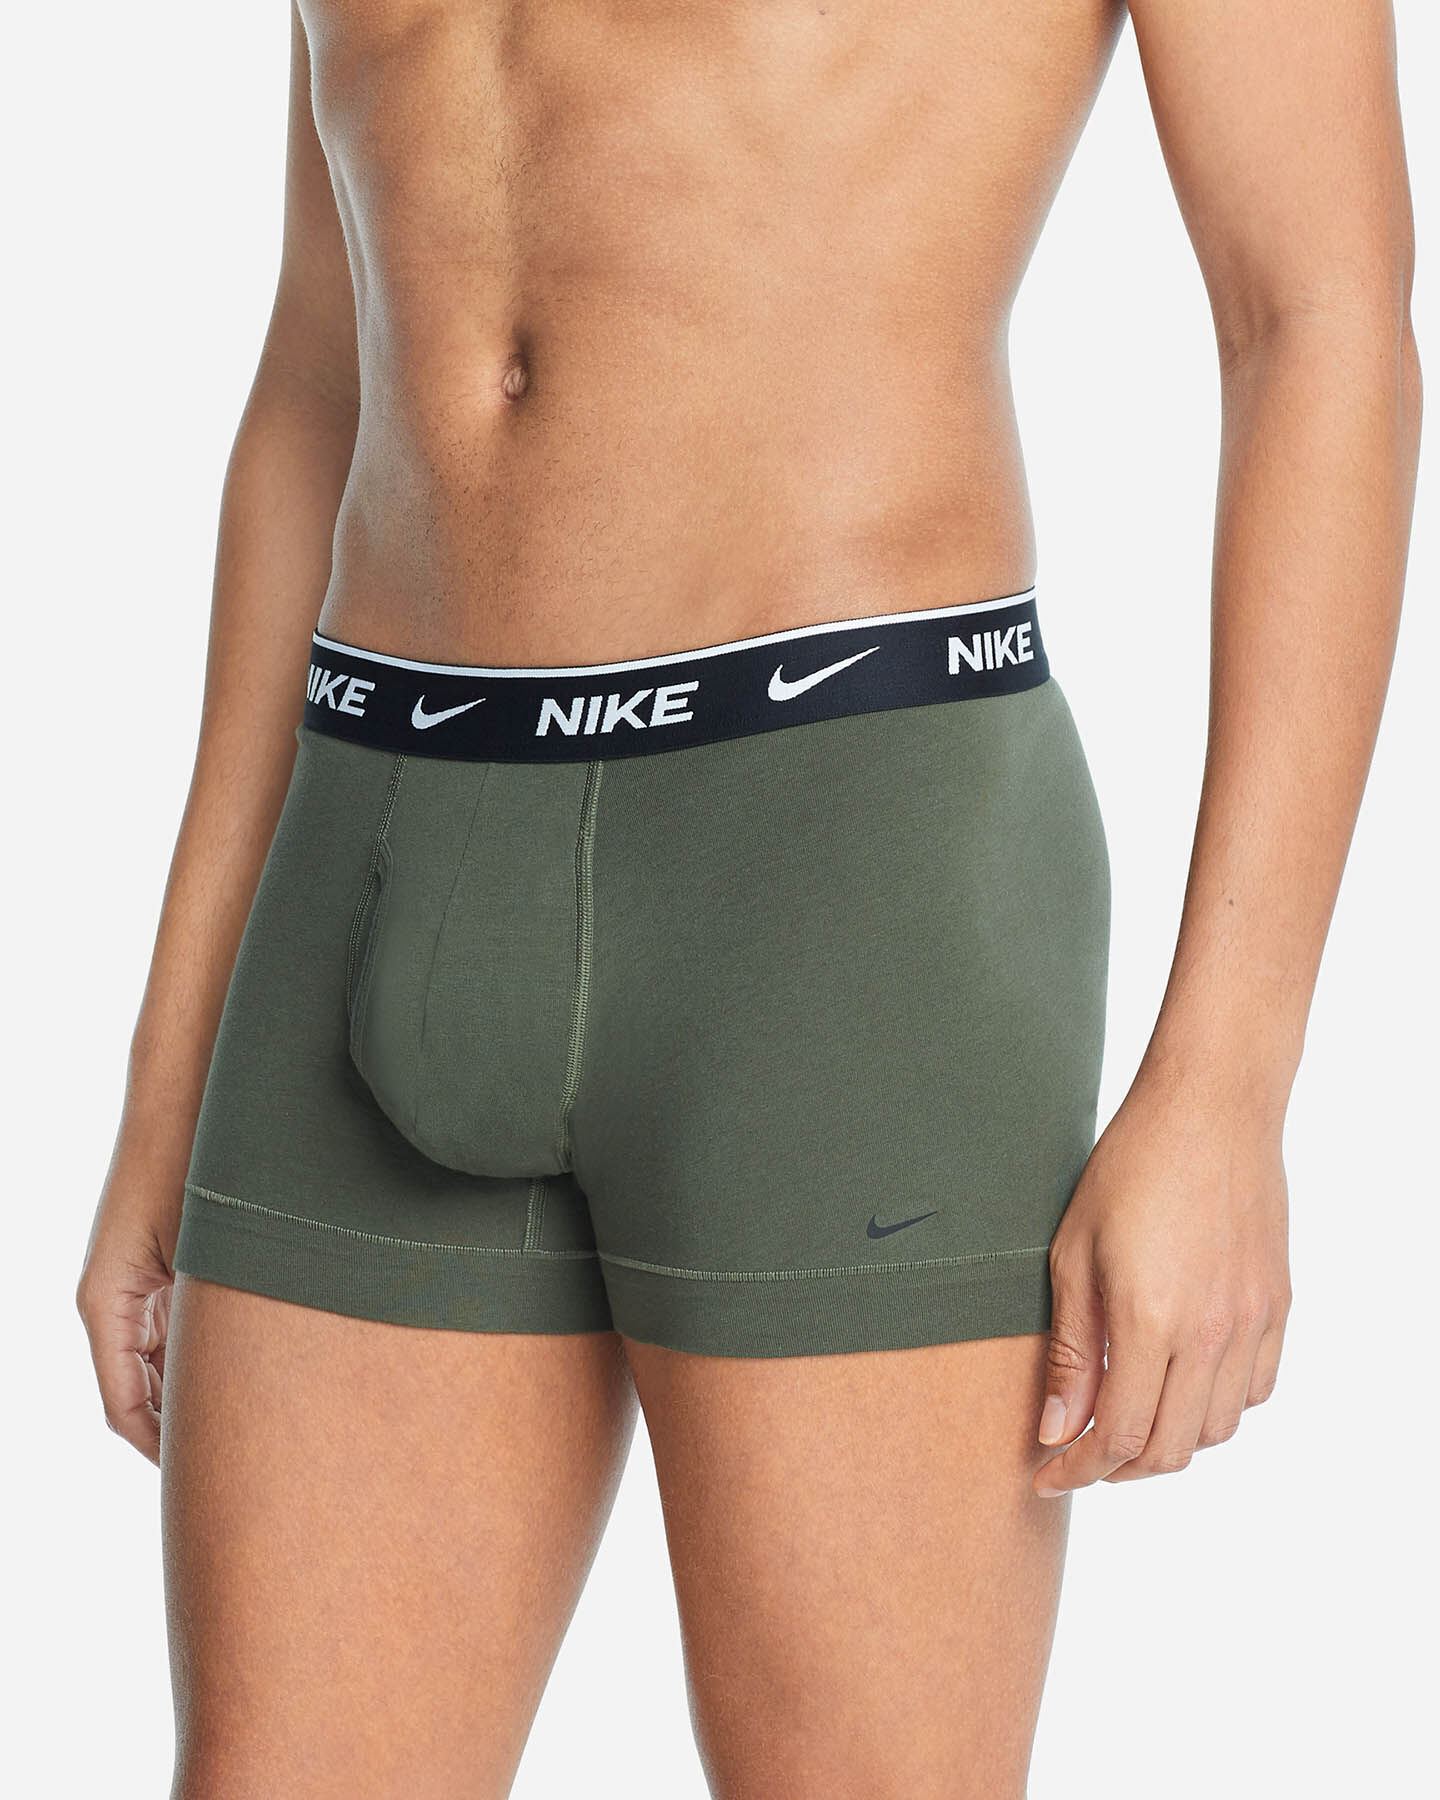  Intimo NIKE 2PACK BOXER EVERYDAY M S4099898|KUY|XL scatto 2